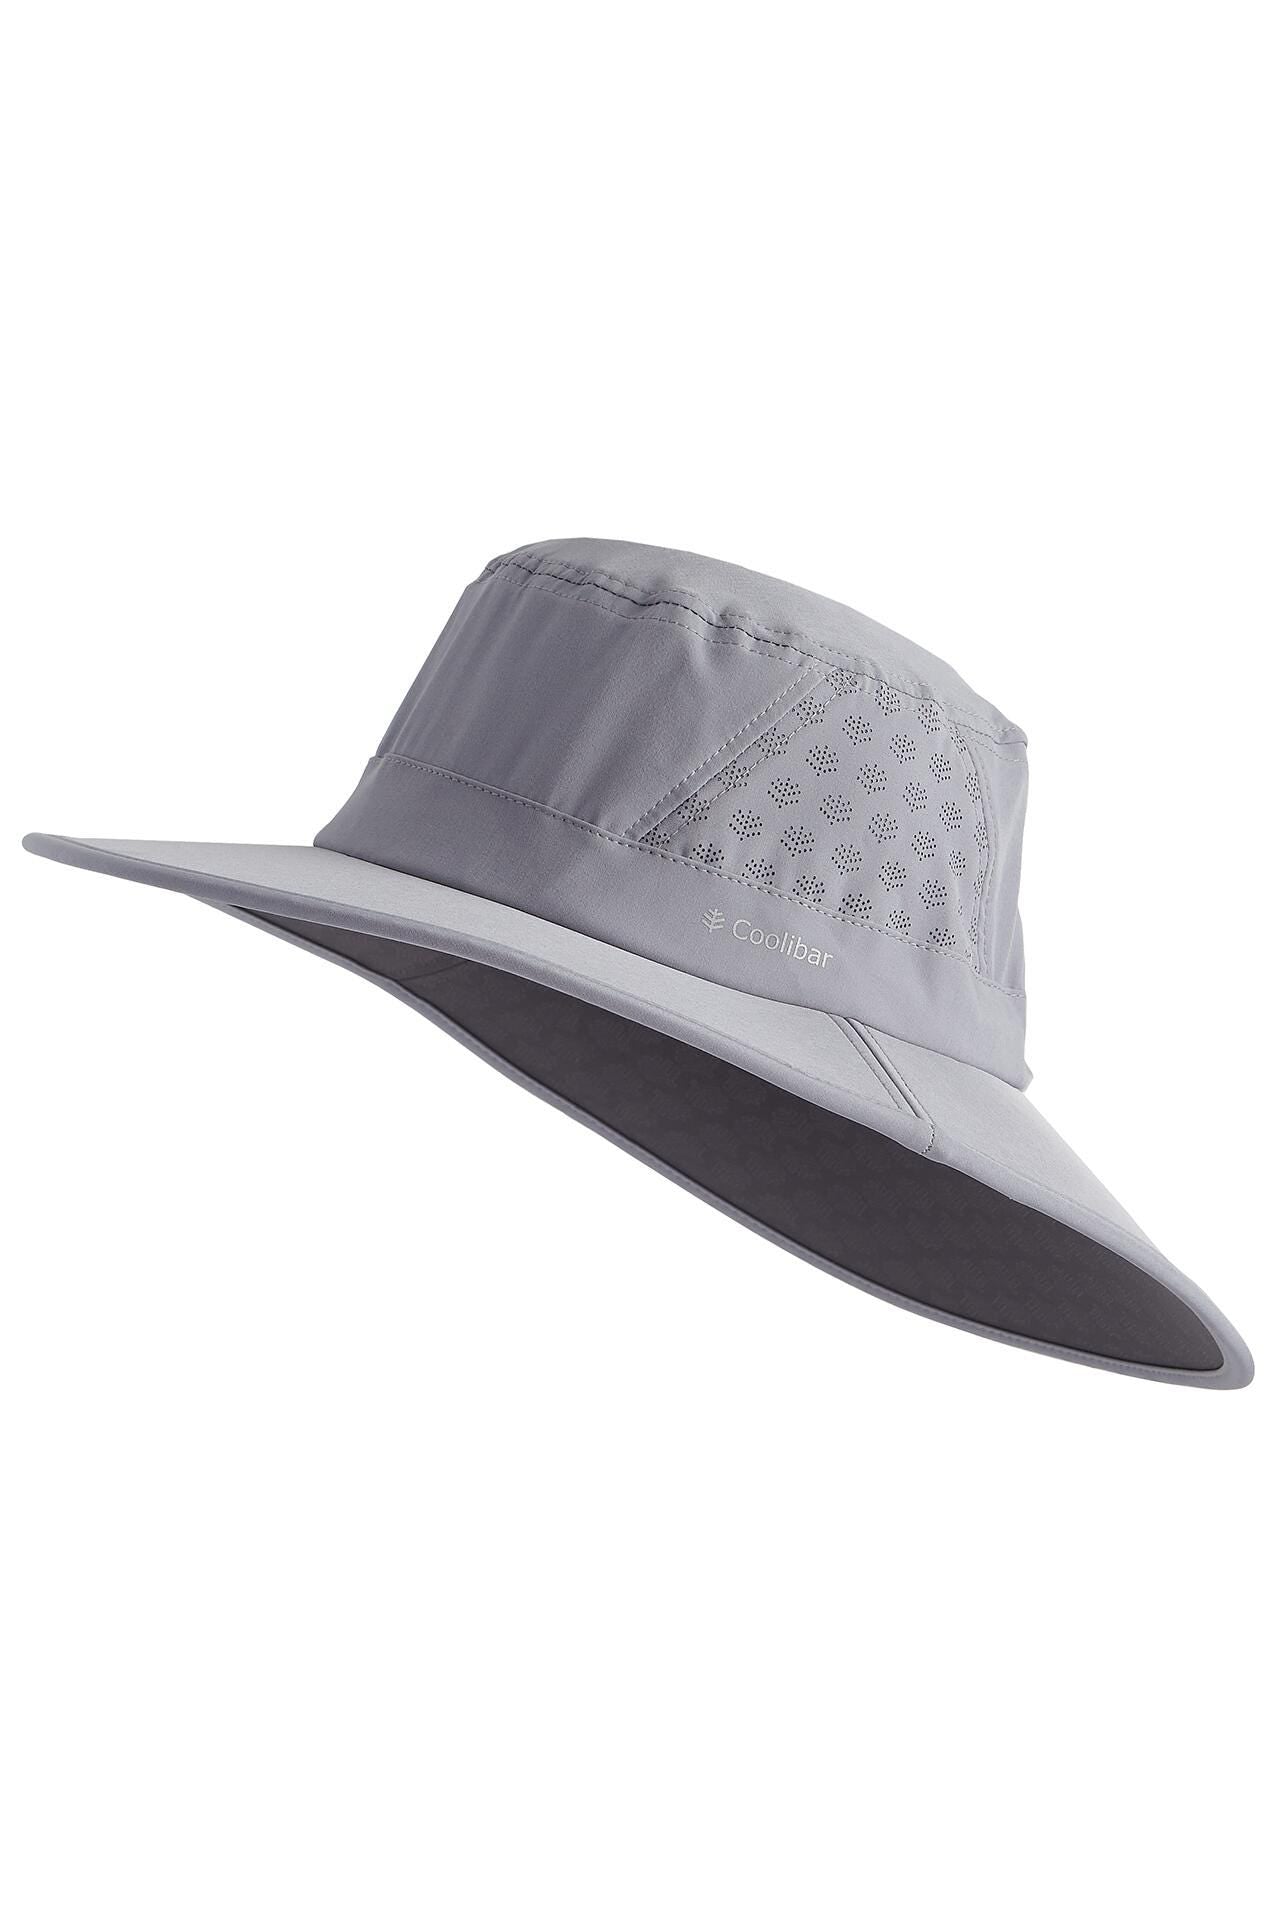 Coolibar Fore Golf Hat - Steel Grey / S/M